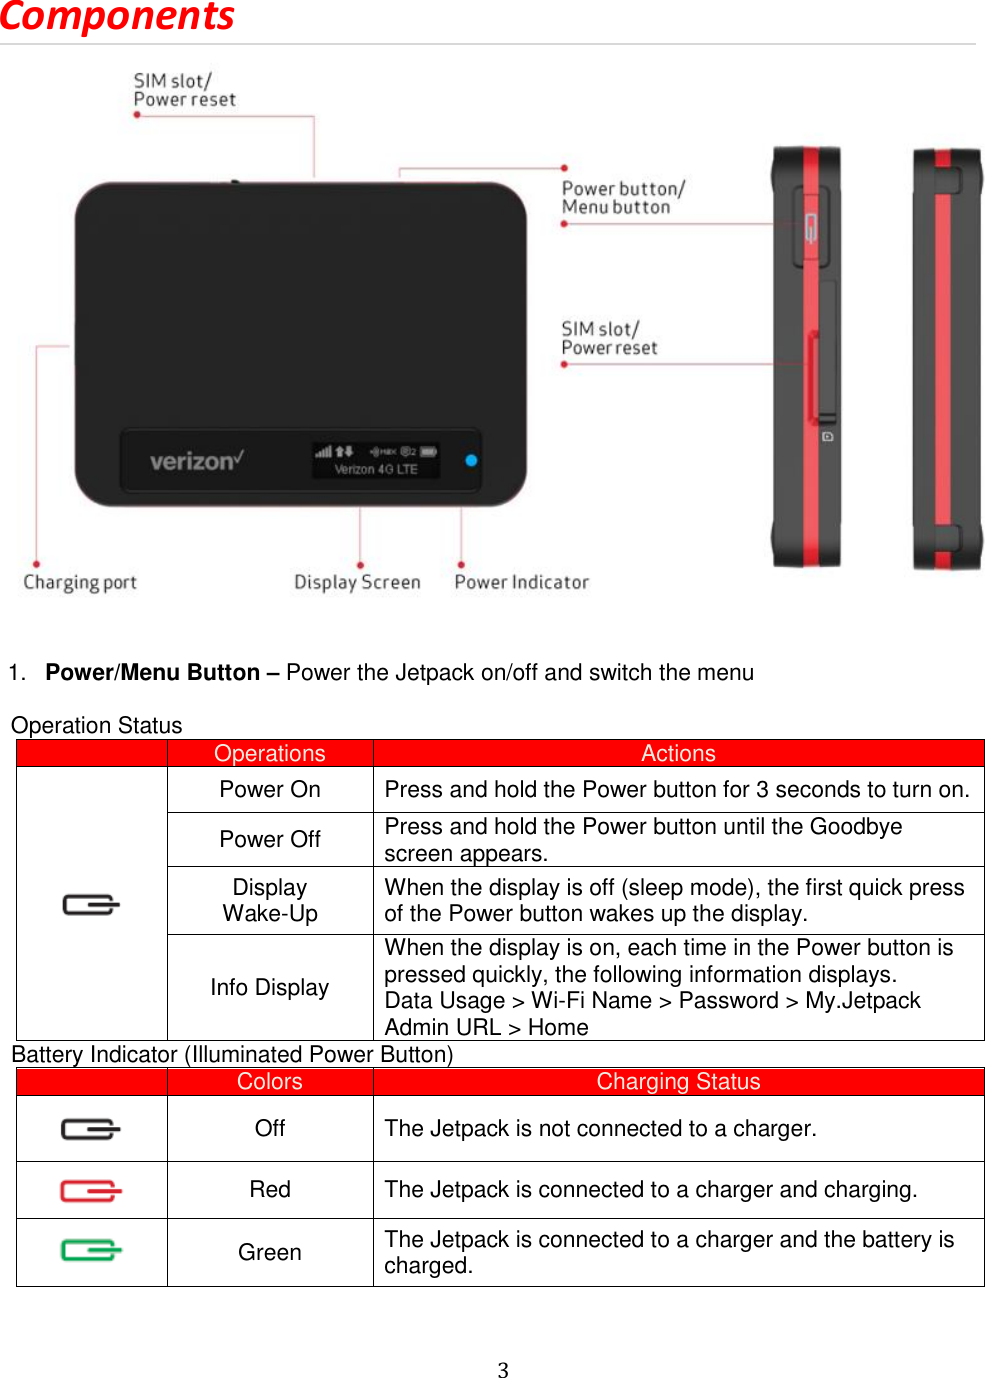   3  Components    1. Power/Menu Button – Power the Jetpack on/off and switch the menu    Operation Status  Operations Actions  Power On Press and hold the Power button for 3 seconds to turn on. Power Off Press and hold the Power button until the Goodbye screen appears. Display Wake-Up When the display is off (sleep mode), the first quick press of the Power button wakes up the display. Info Display When the display is on, each time in the Power button is pressed quickly, the following information displays. Data Usage &gt; Wi-Fi Name &gt; Password &gt; My.Jetpack Admin URL &gt; Home   Battery Indicator (Illuminated Power Button)  Colors Charging Status  Off The Jetpack is not connected to a charger.  Red The Jetpack is connected to a charger and charging.  Green The Jetpack is connected to a charger and the battery is charged.  